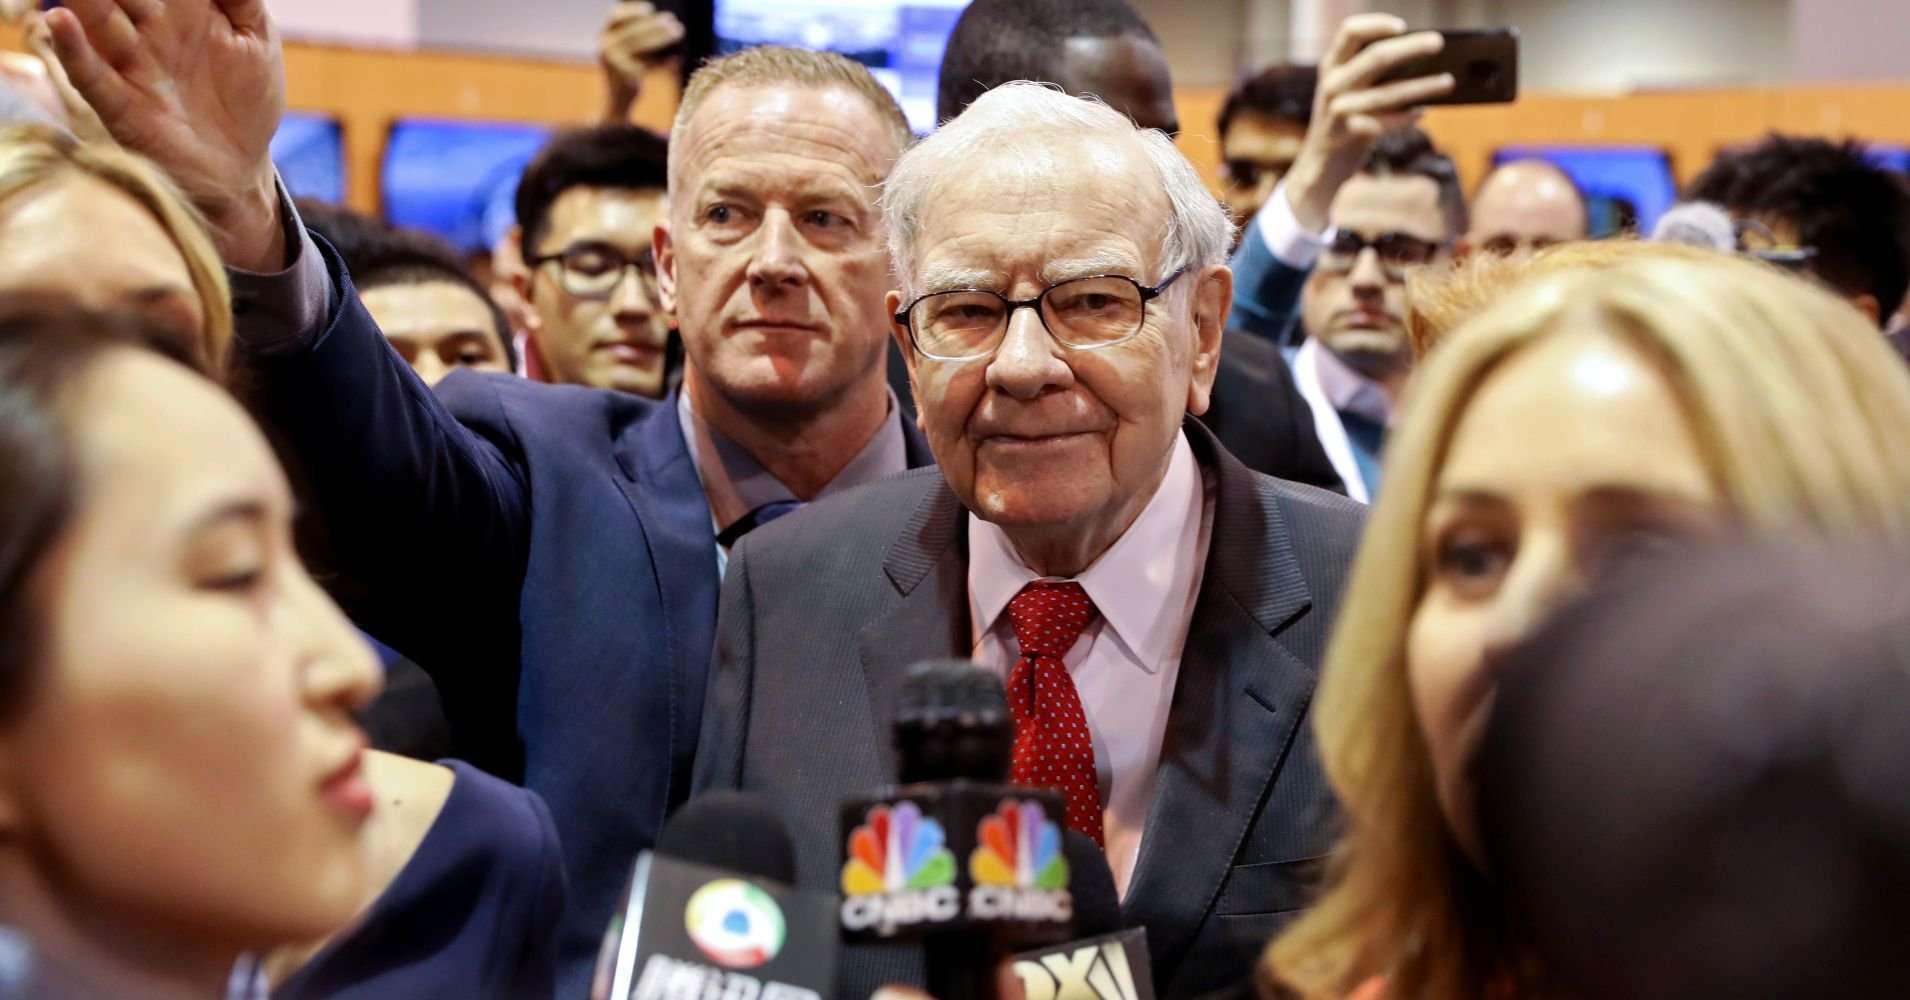 image for Warren Buffett: If a bank needs a government bailout, the CEO and spouse should lose 'net worth'